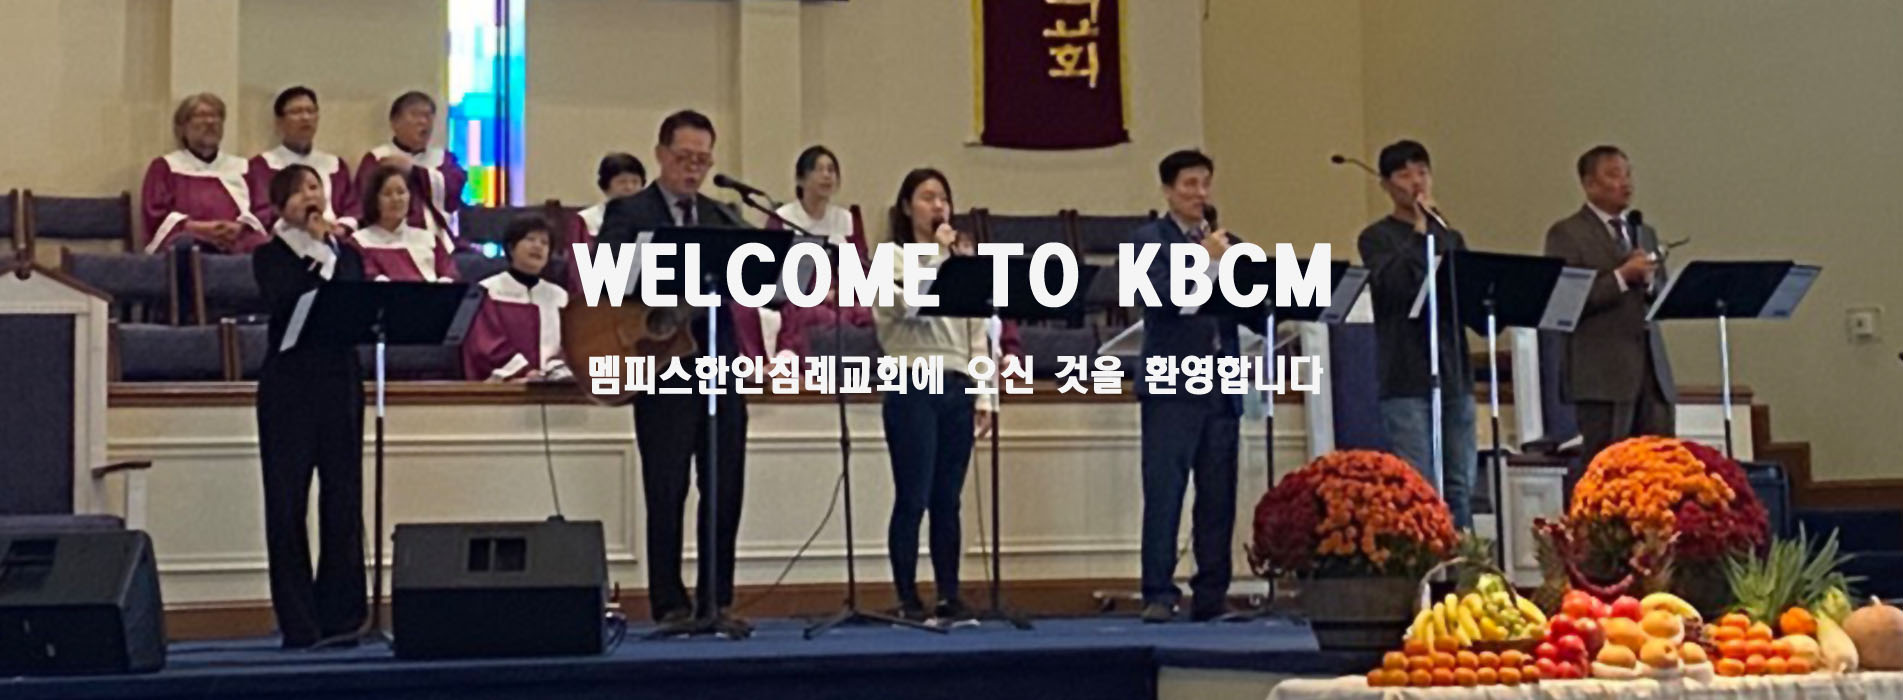 Welcome To KBCM